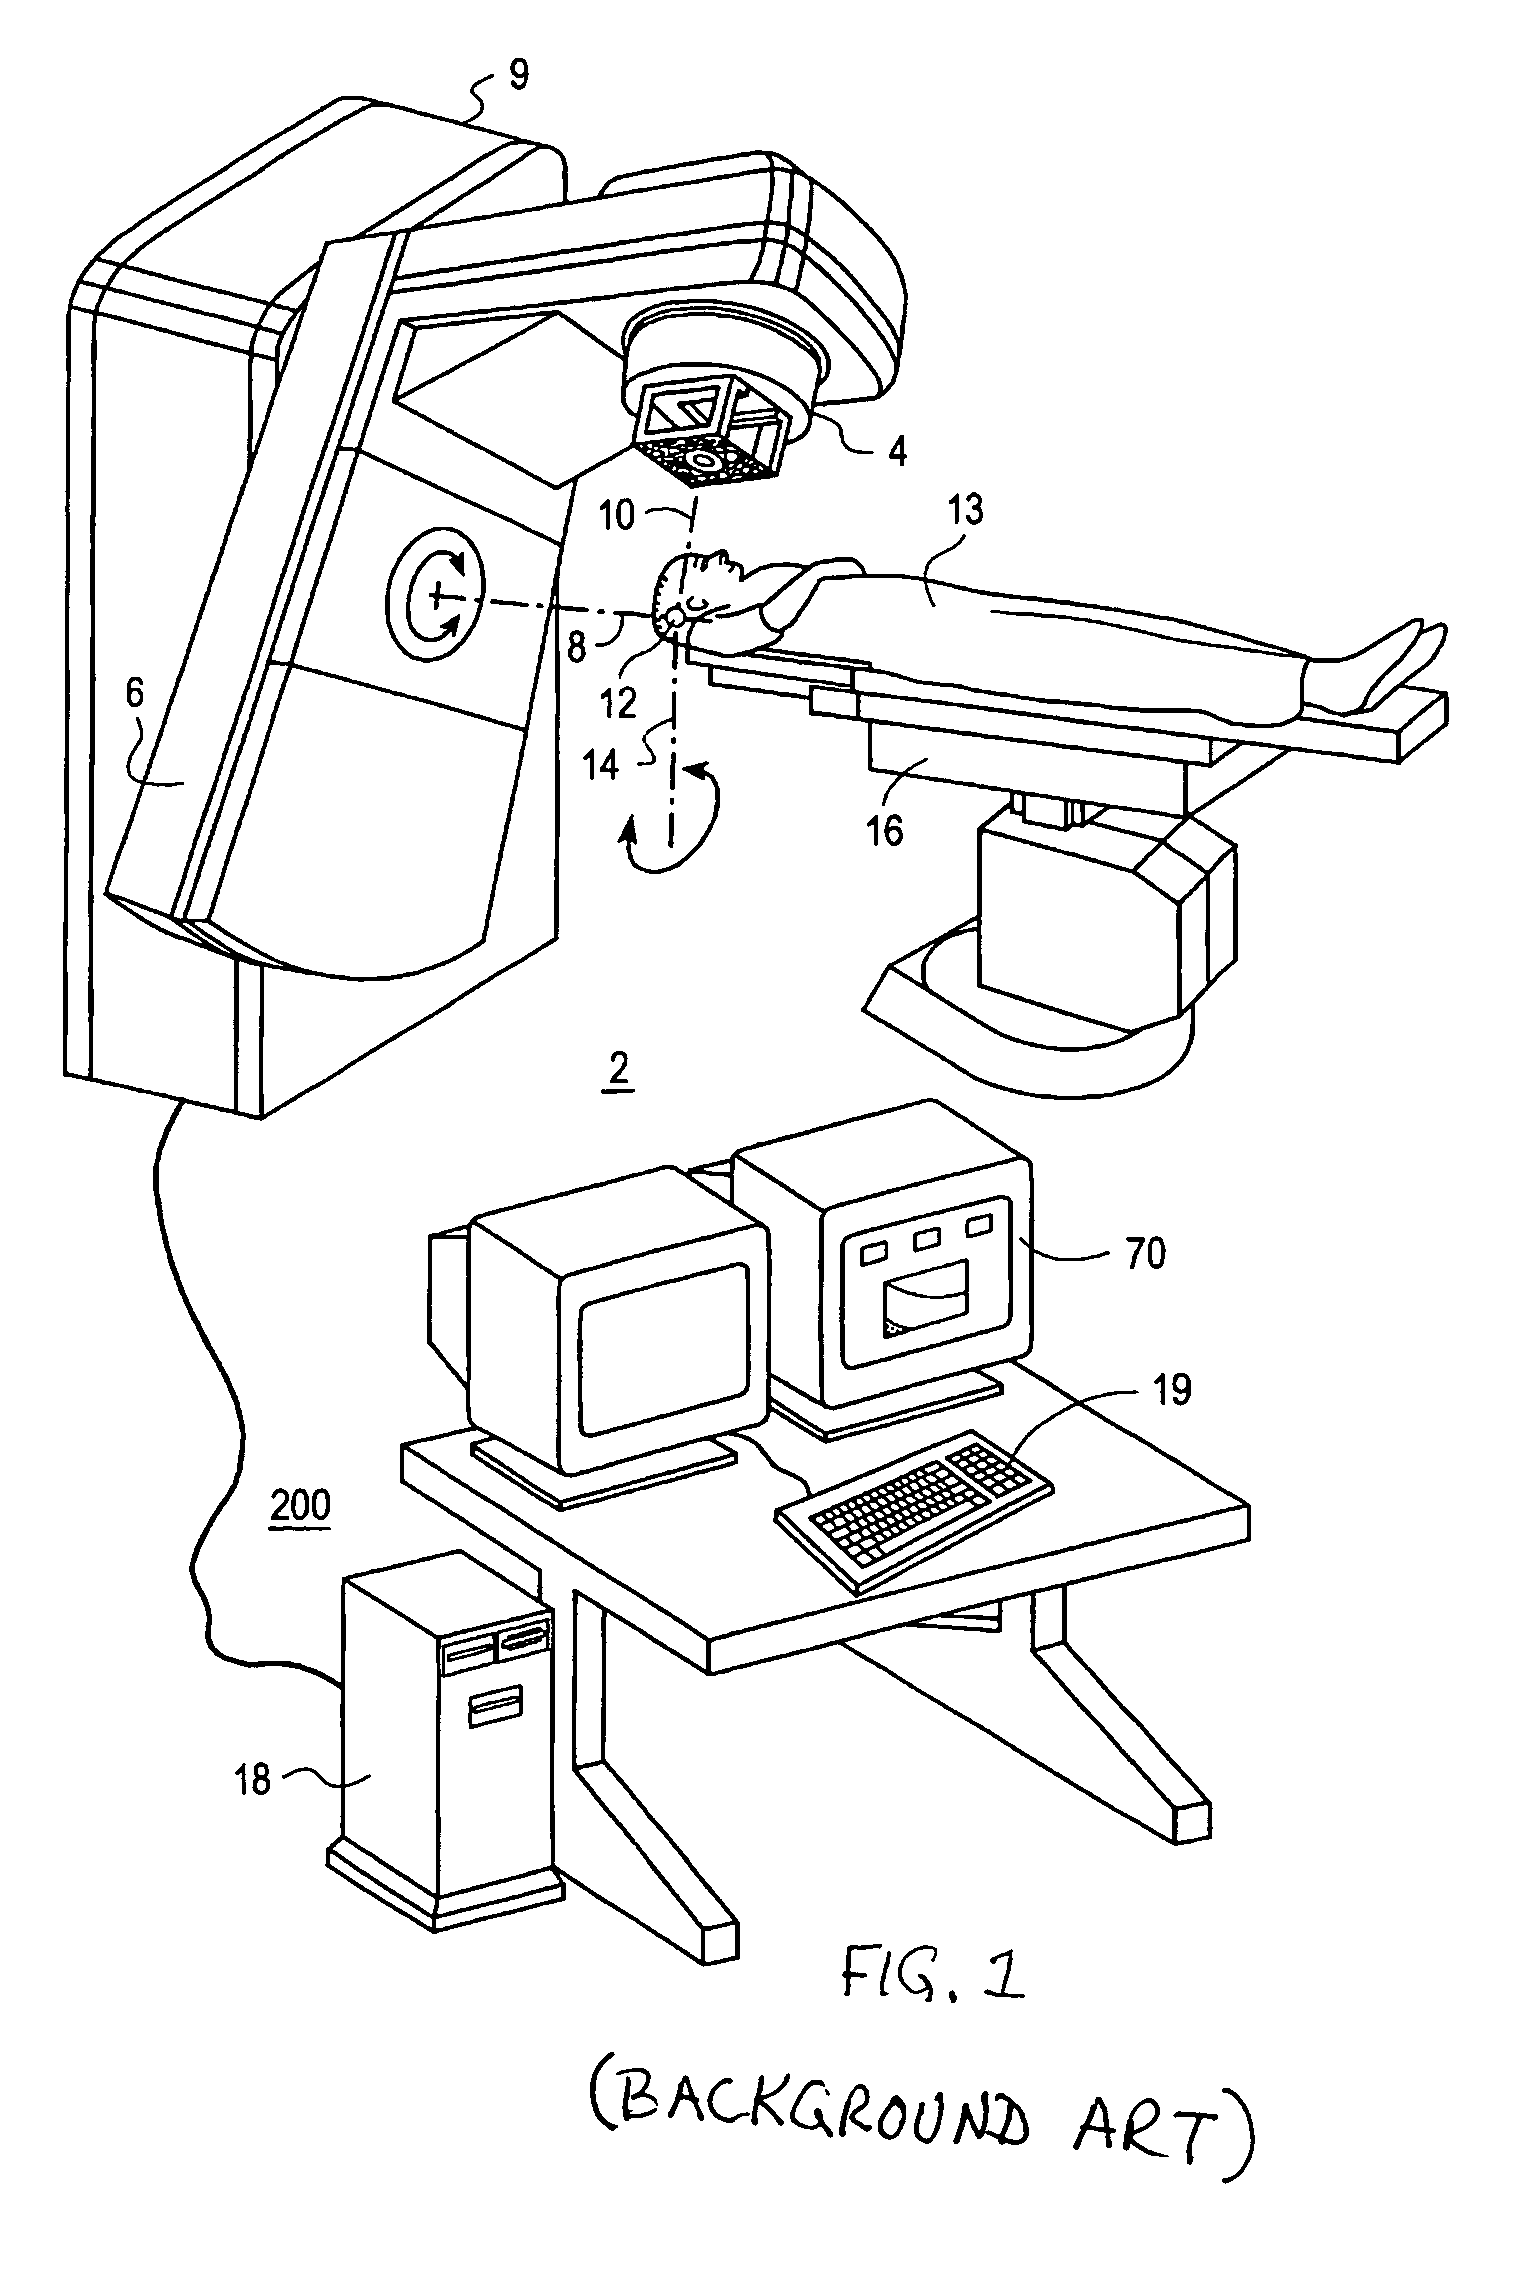 Method for intensity modulated radiation treatment using independent collimator jaws